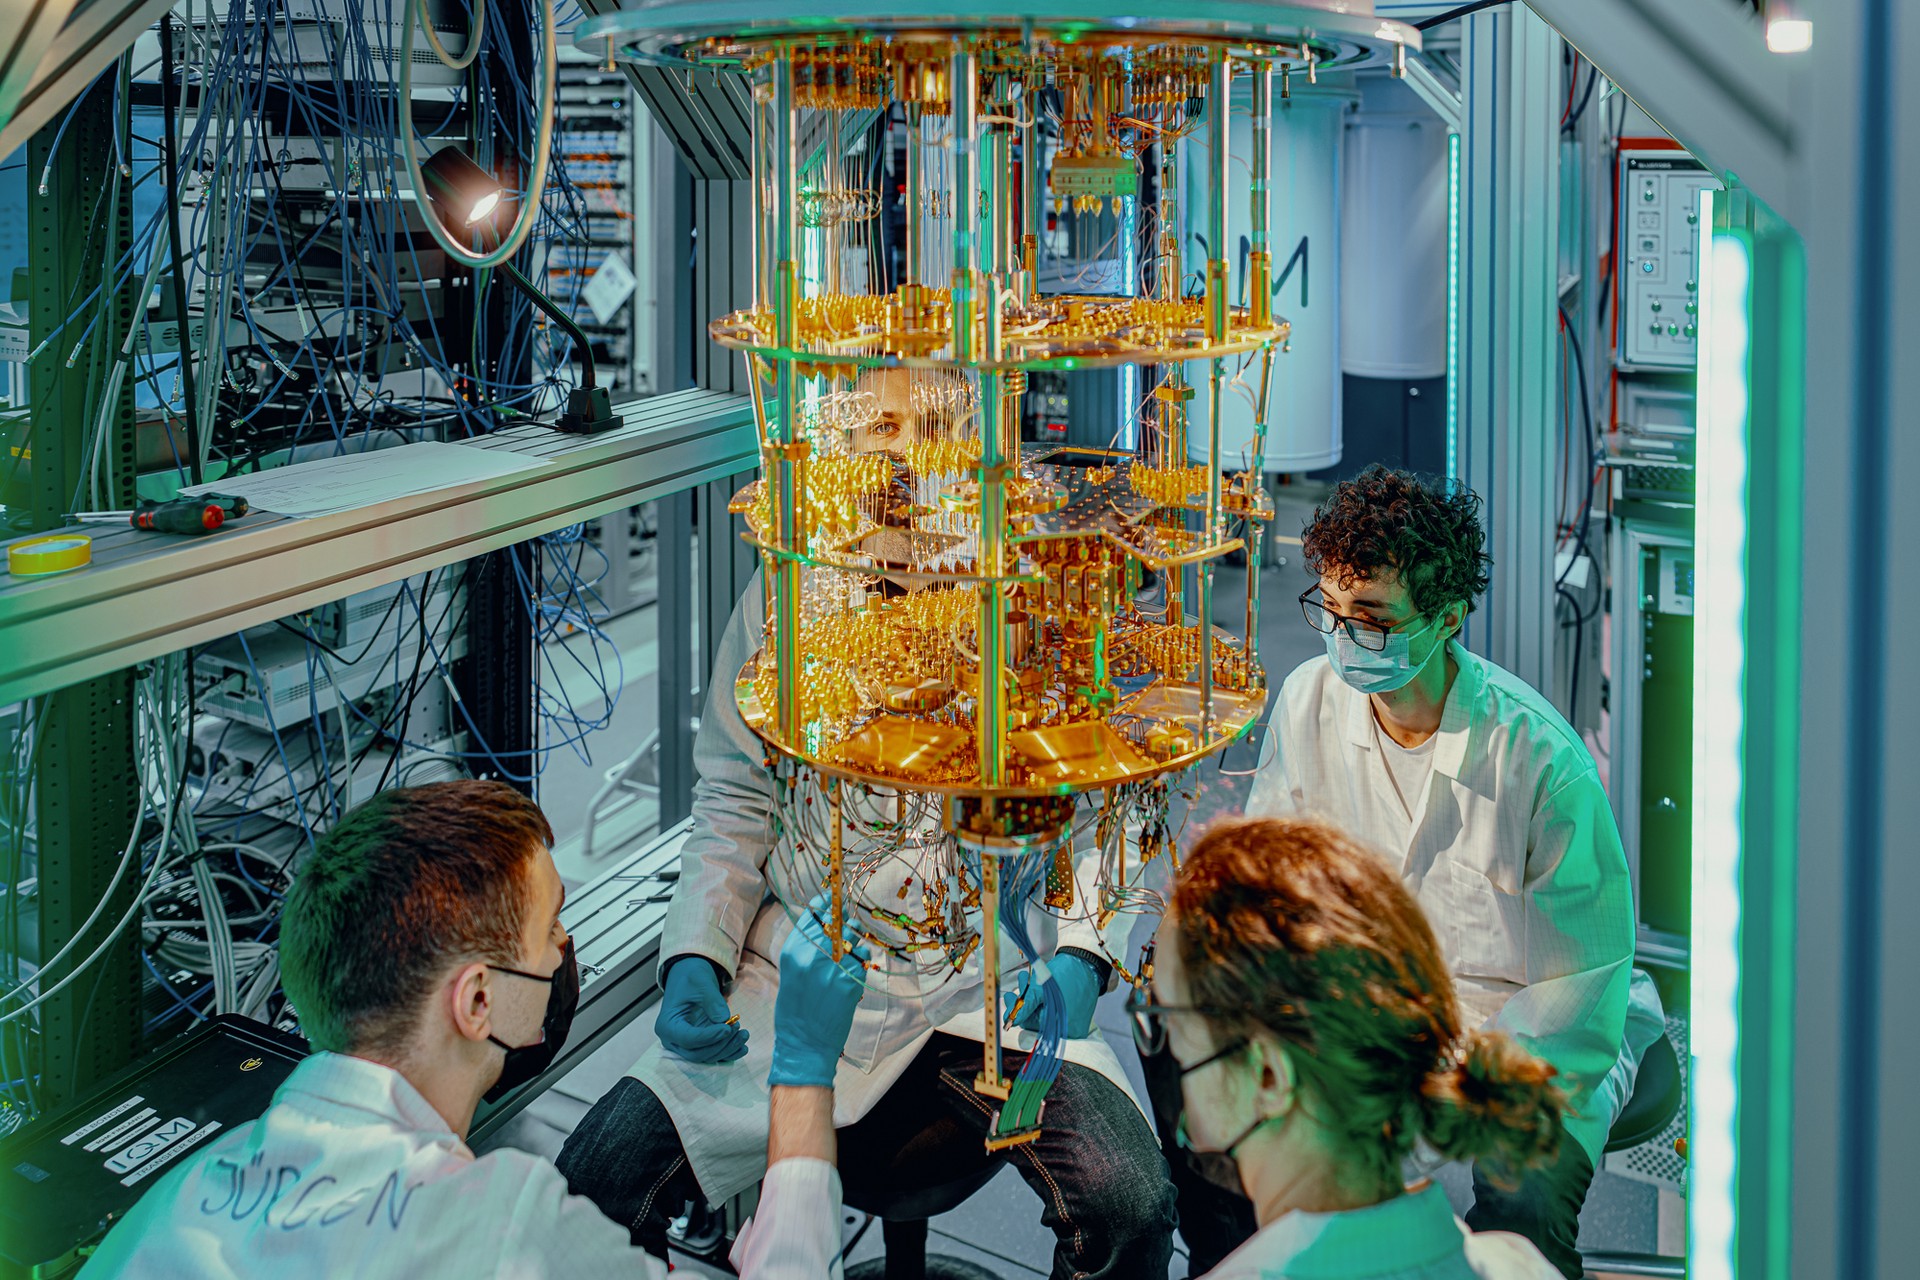 Learn more about quantum computing in this interactive learning experience